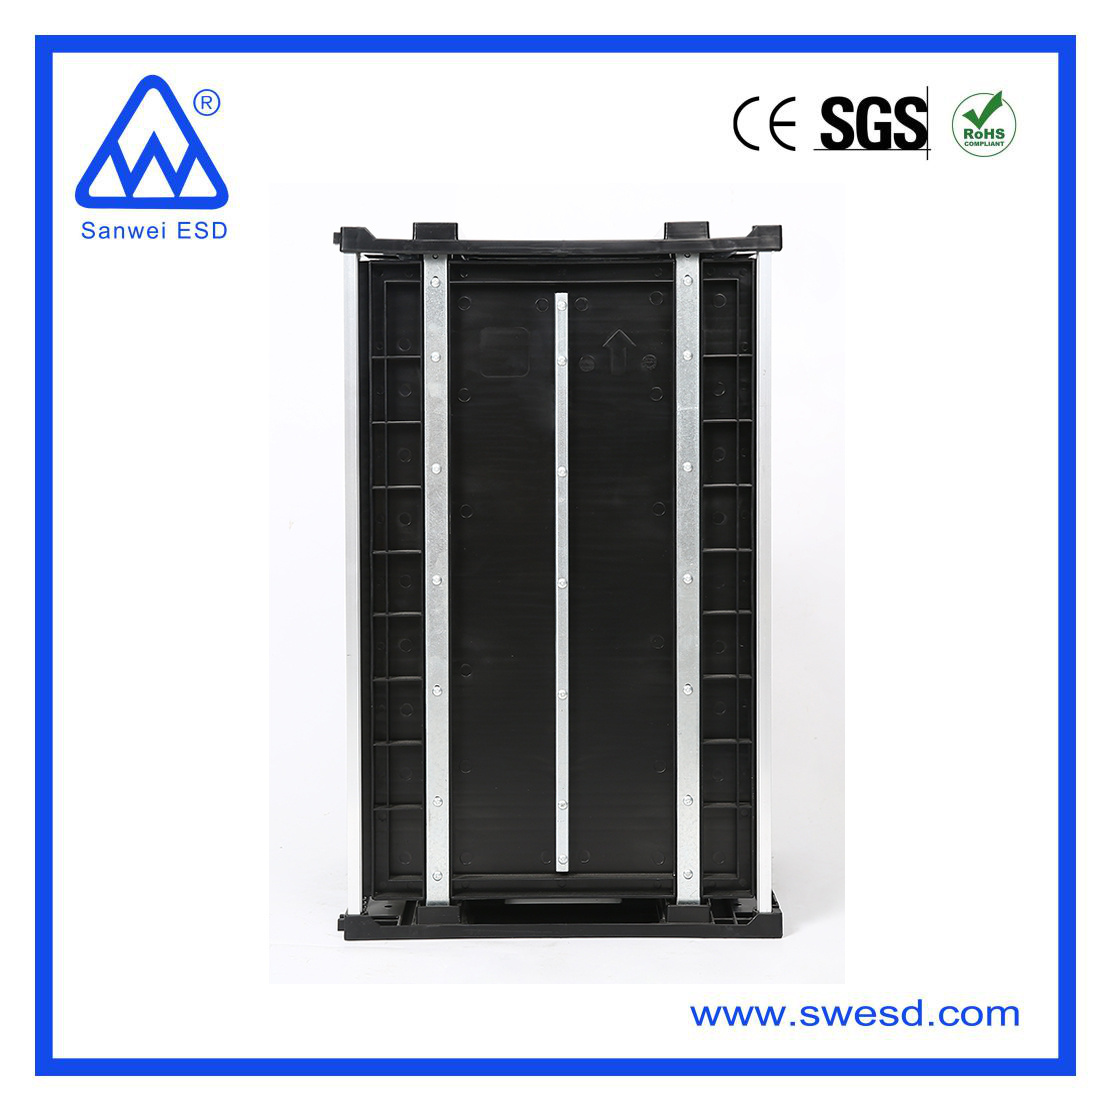 3W-9805301A （Anti-static collection rack）